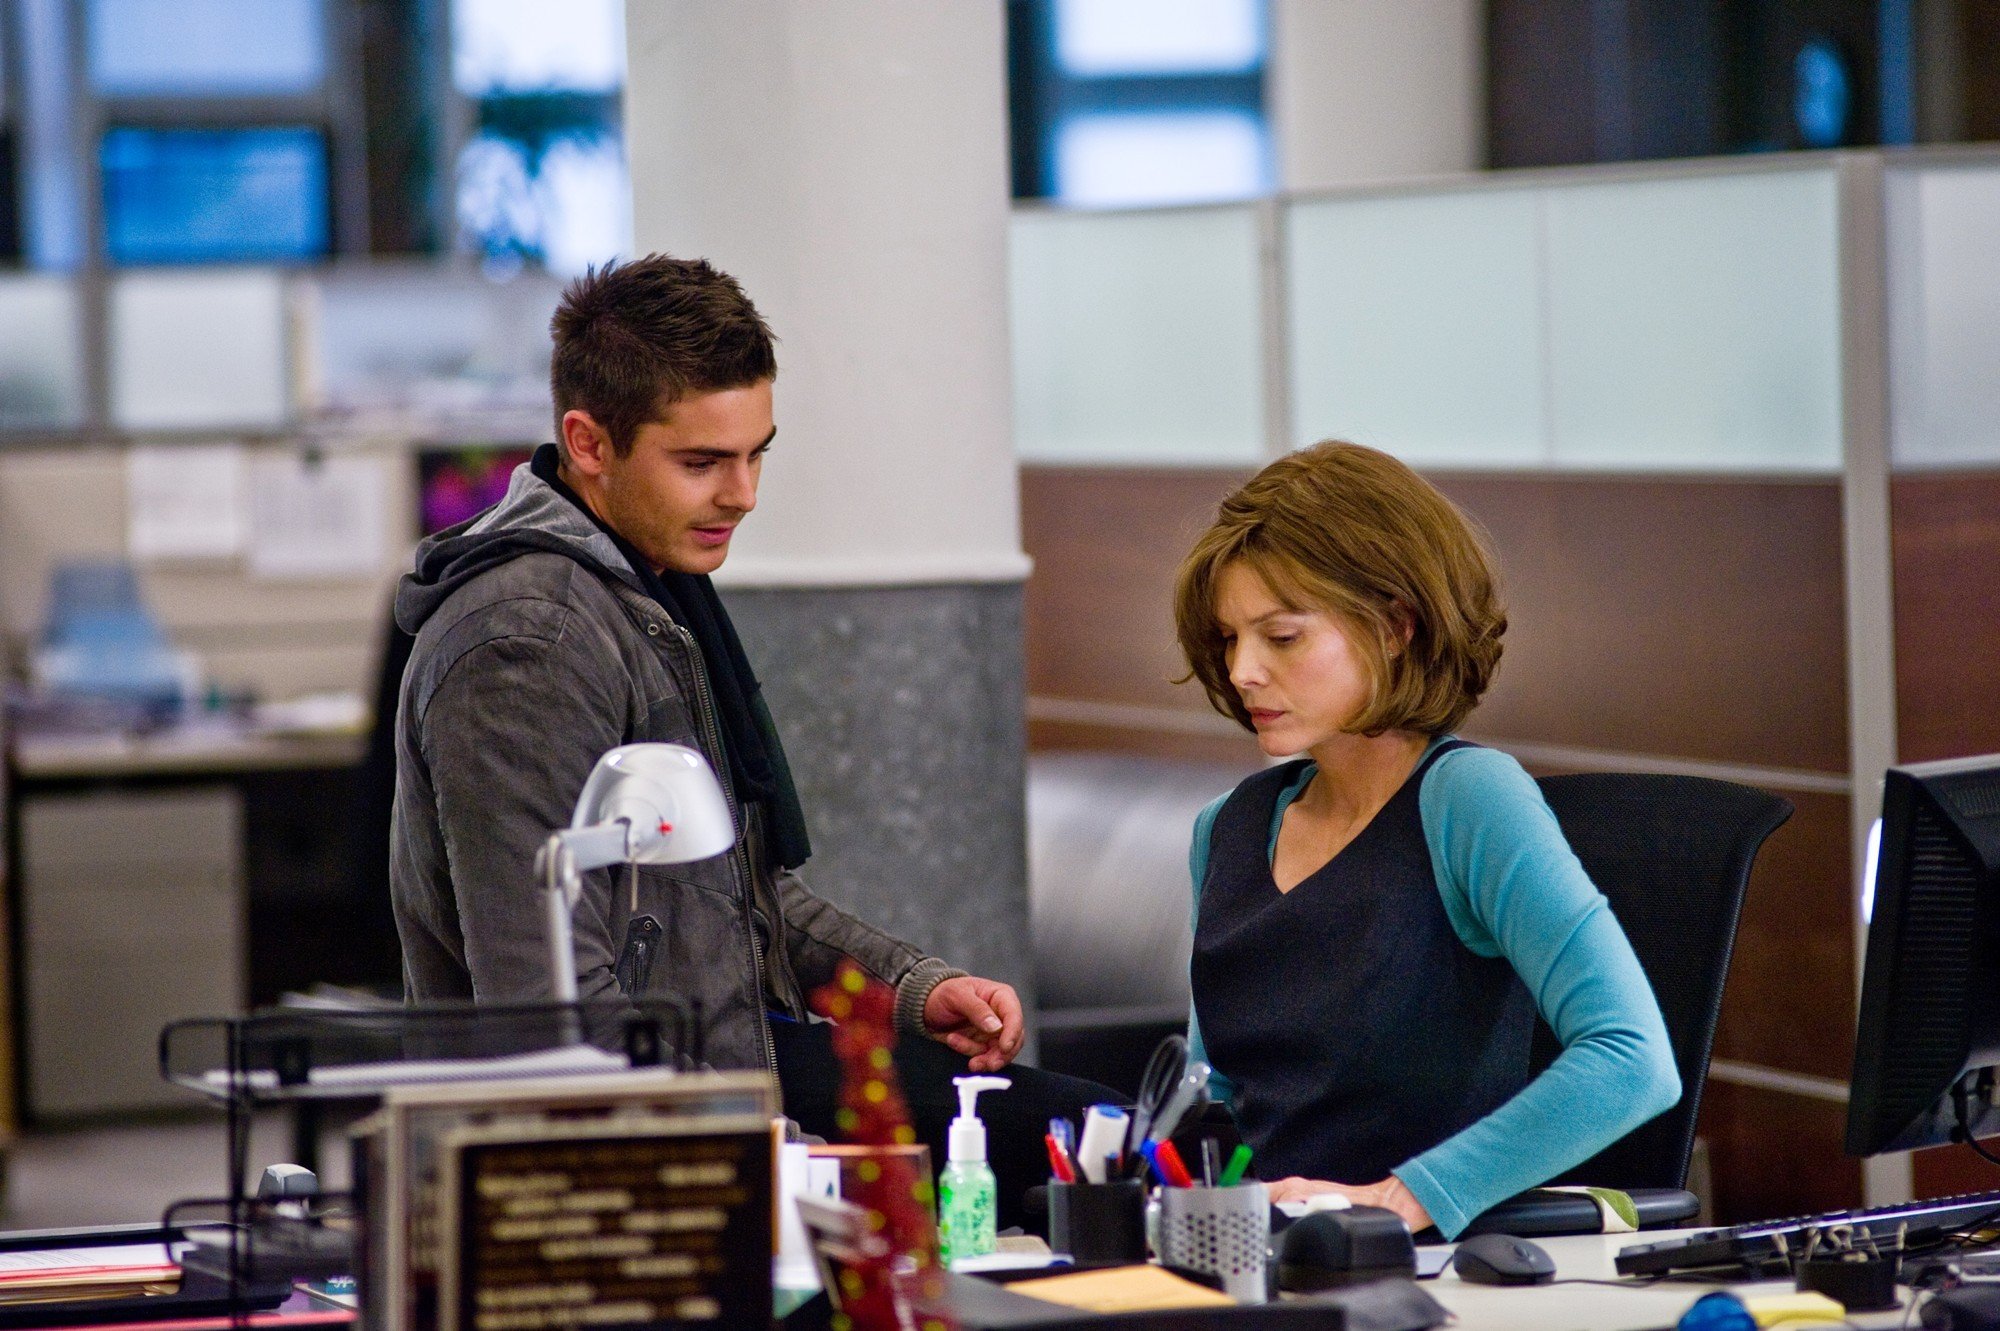 Zac Efron stars as Paul and Michelle Pfeiffer stars as Ingrid in Warner Bros. Pictures' New Year's Eve (2011)